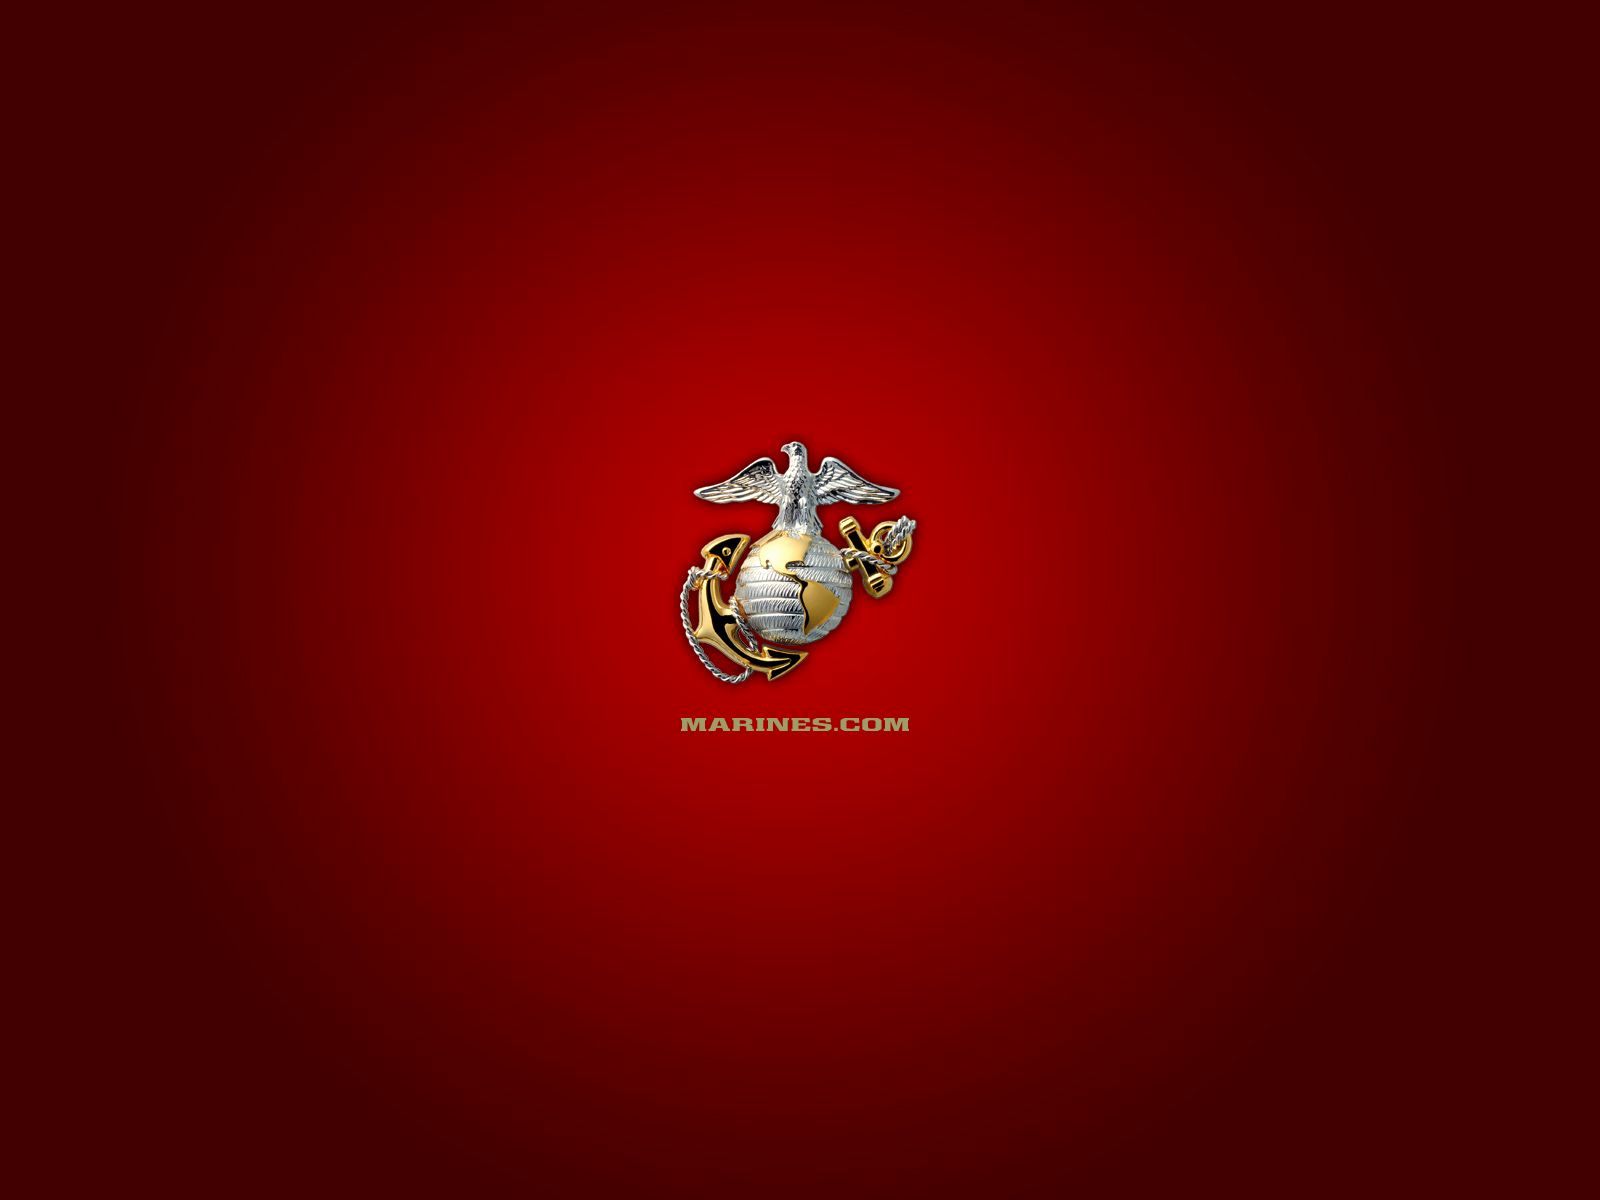 United States Marine Corps Eagle Globe And Anchor  United States Marine  Corps Marines Wallpaper Iphone  400x400 PNG Download  PNGkit